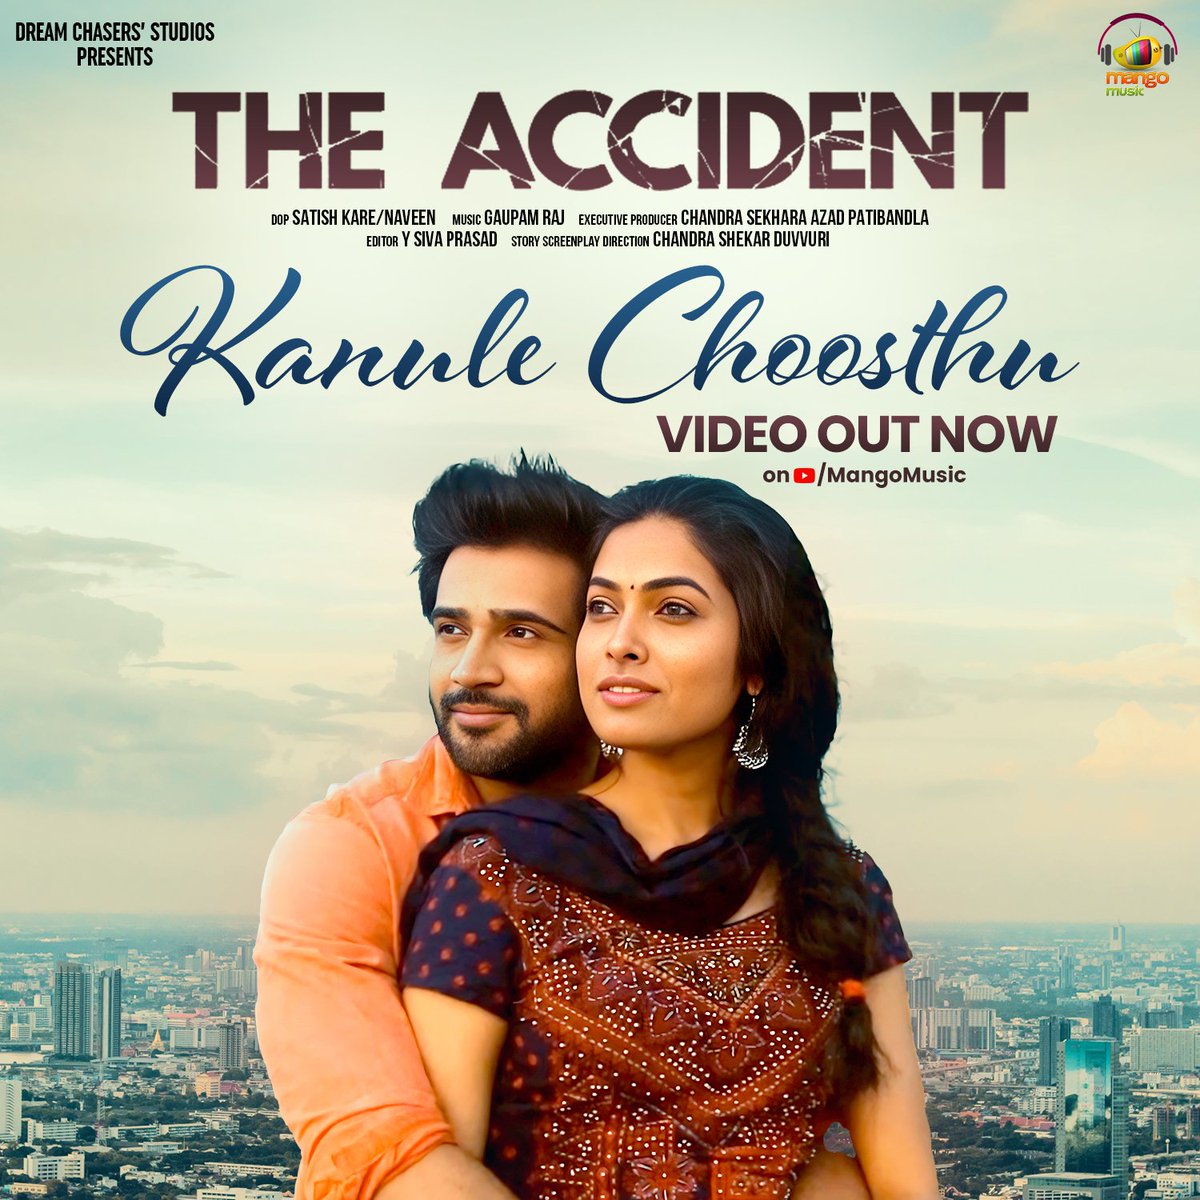 Experience the beauty of love through music with #KanuleChoosthu from #TheAccident movie. 🎶💑 

It's out now on @mangomusiclabel, don't miss out on this heartwarming melody 💖🌟

🔗 youtu.be/PS3ekmHUiCw

🎤 Vocals - #sireeshabhagavatula #vocallyayaan

🖋️Lyrics - #Anilkishore